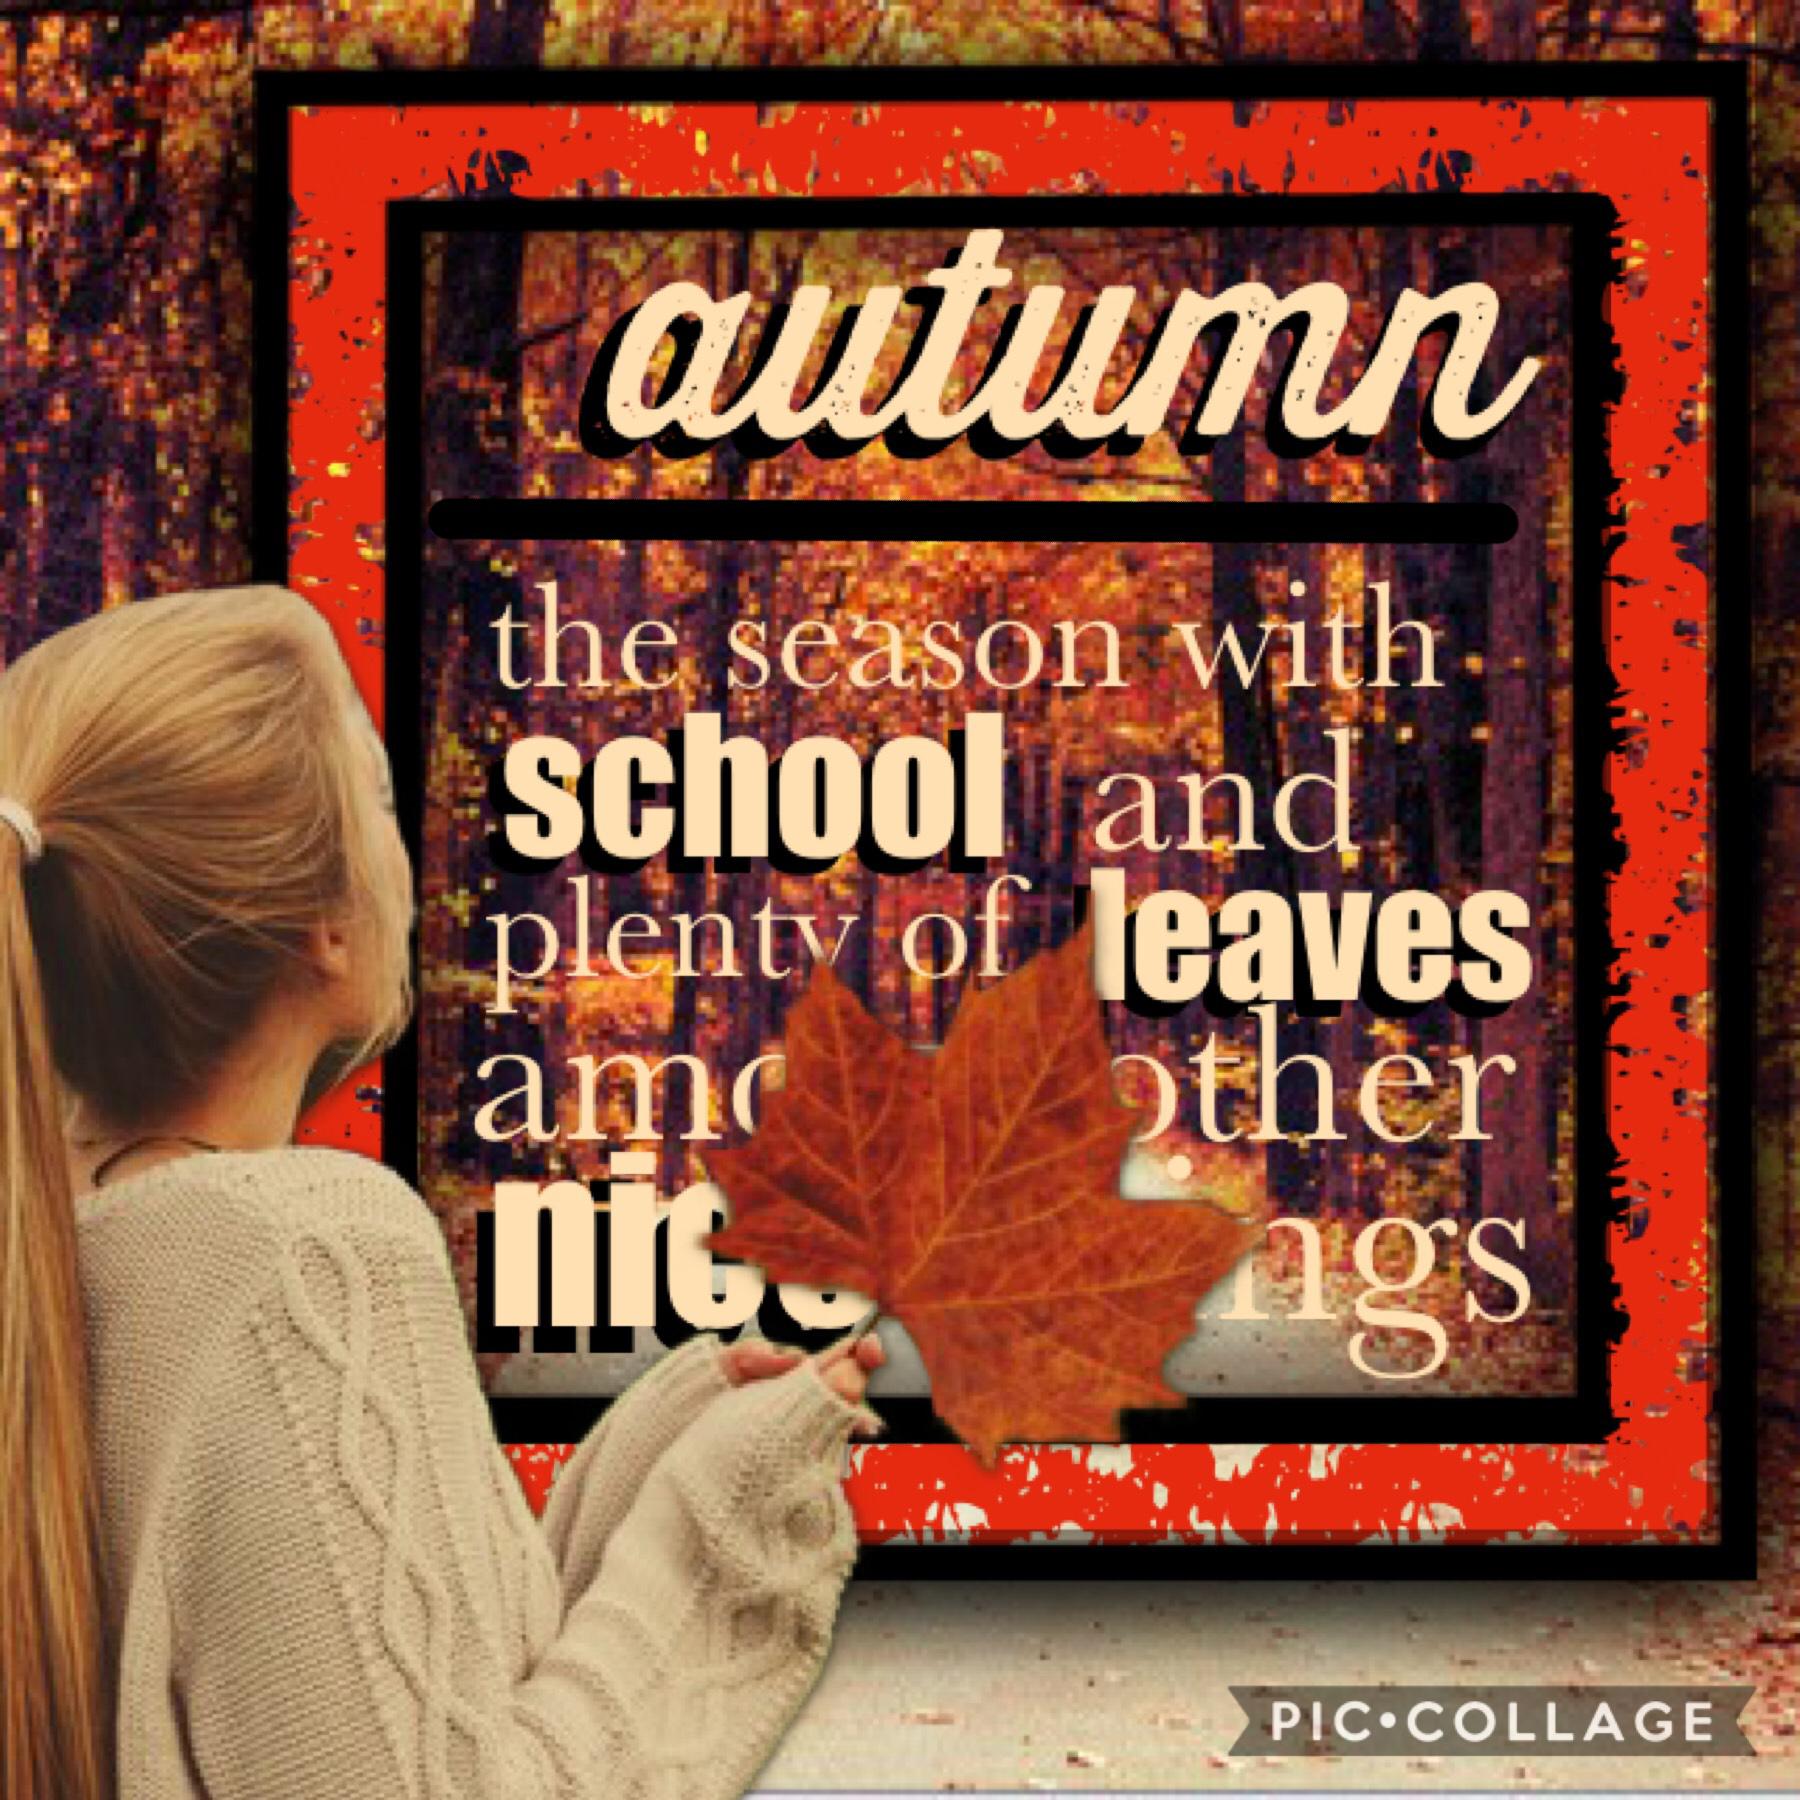 tap!
Embracing my inner autumn. It’s so pretty, right? I’m currently stressing about a PreCal test tomorrow and any words of encouragement would be very much appreciated. Thanks! 💕